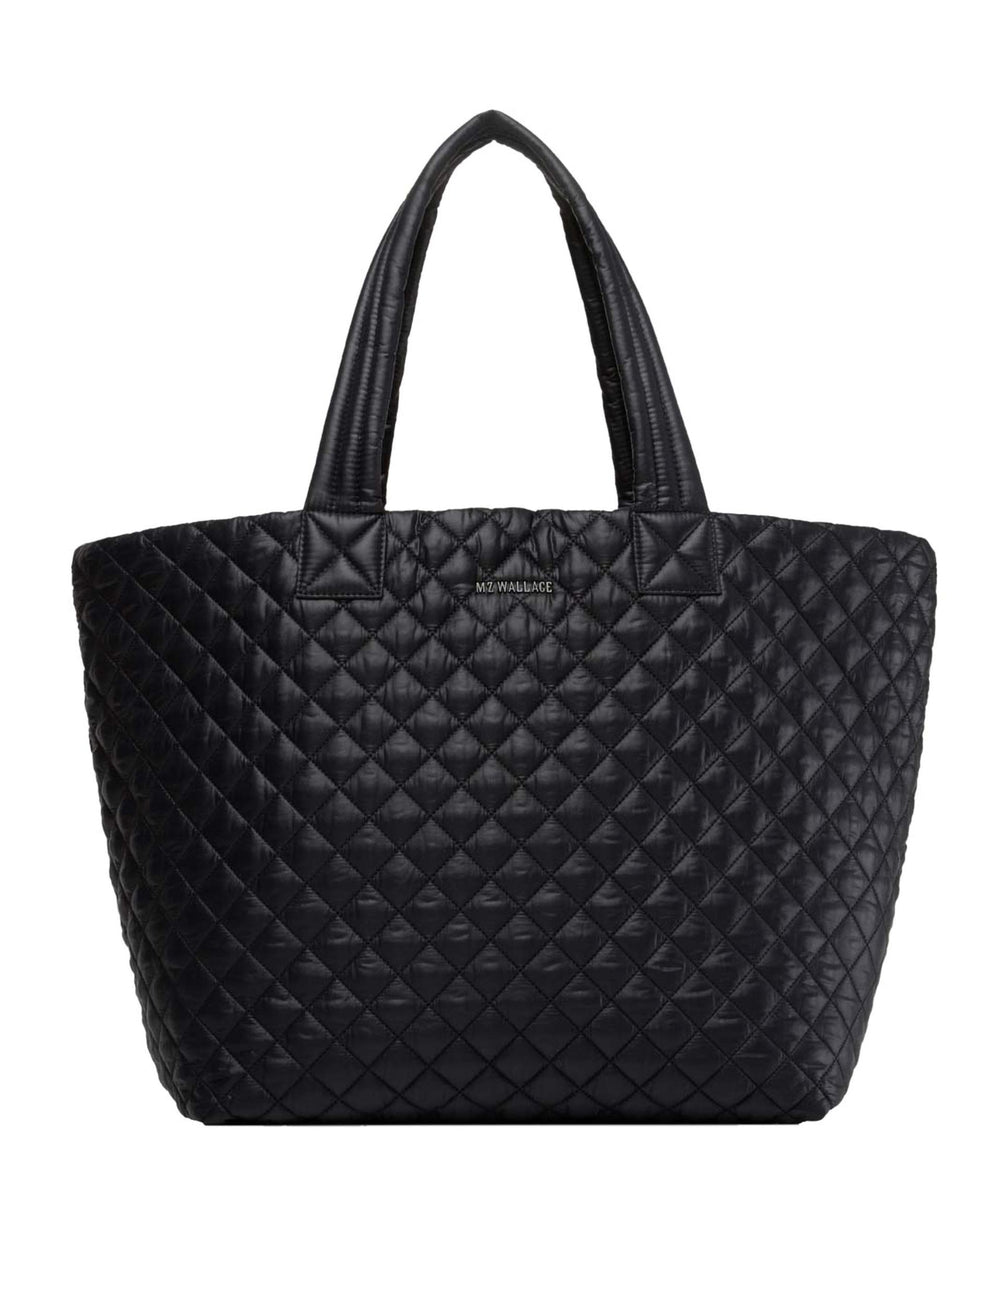 MZ Wallace | Large Metro Tote - Black | The Sports Edit